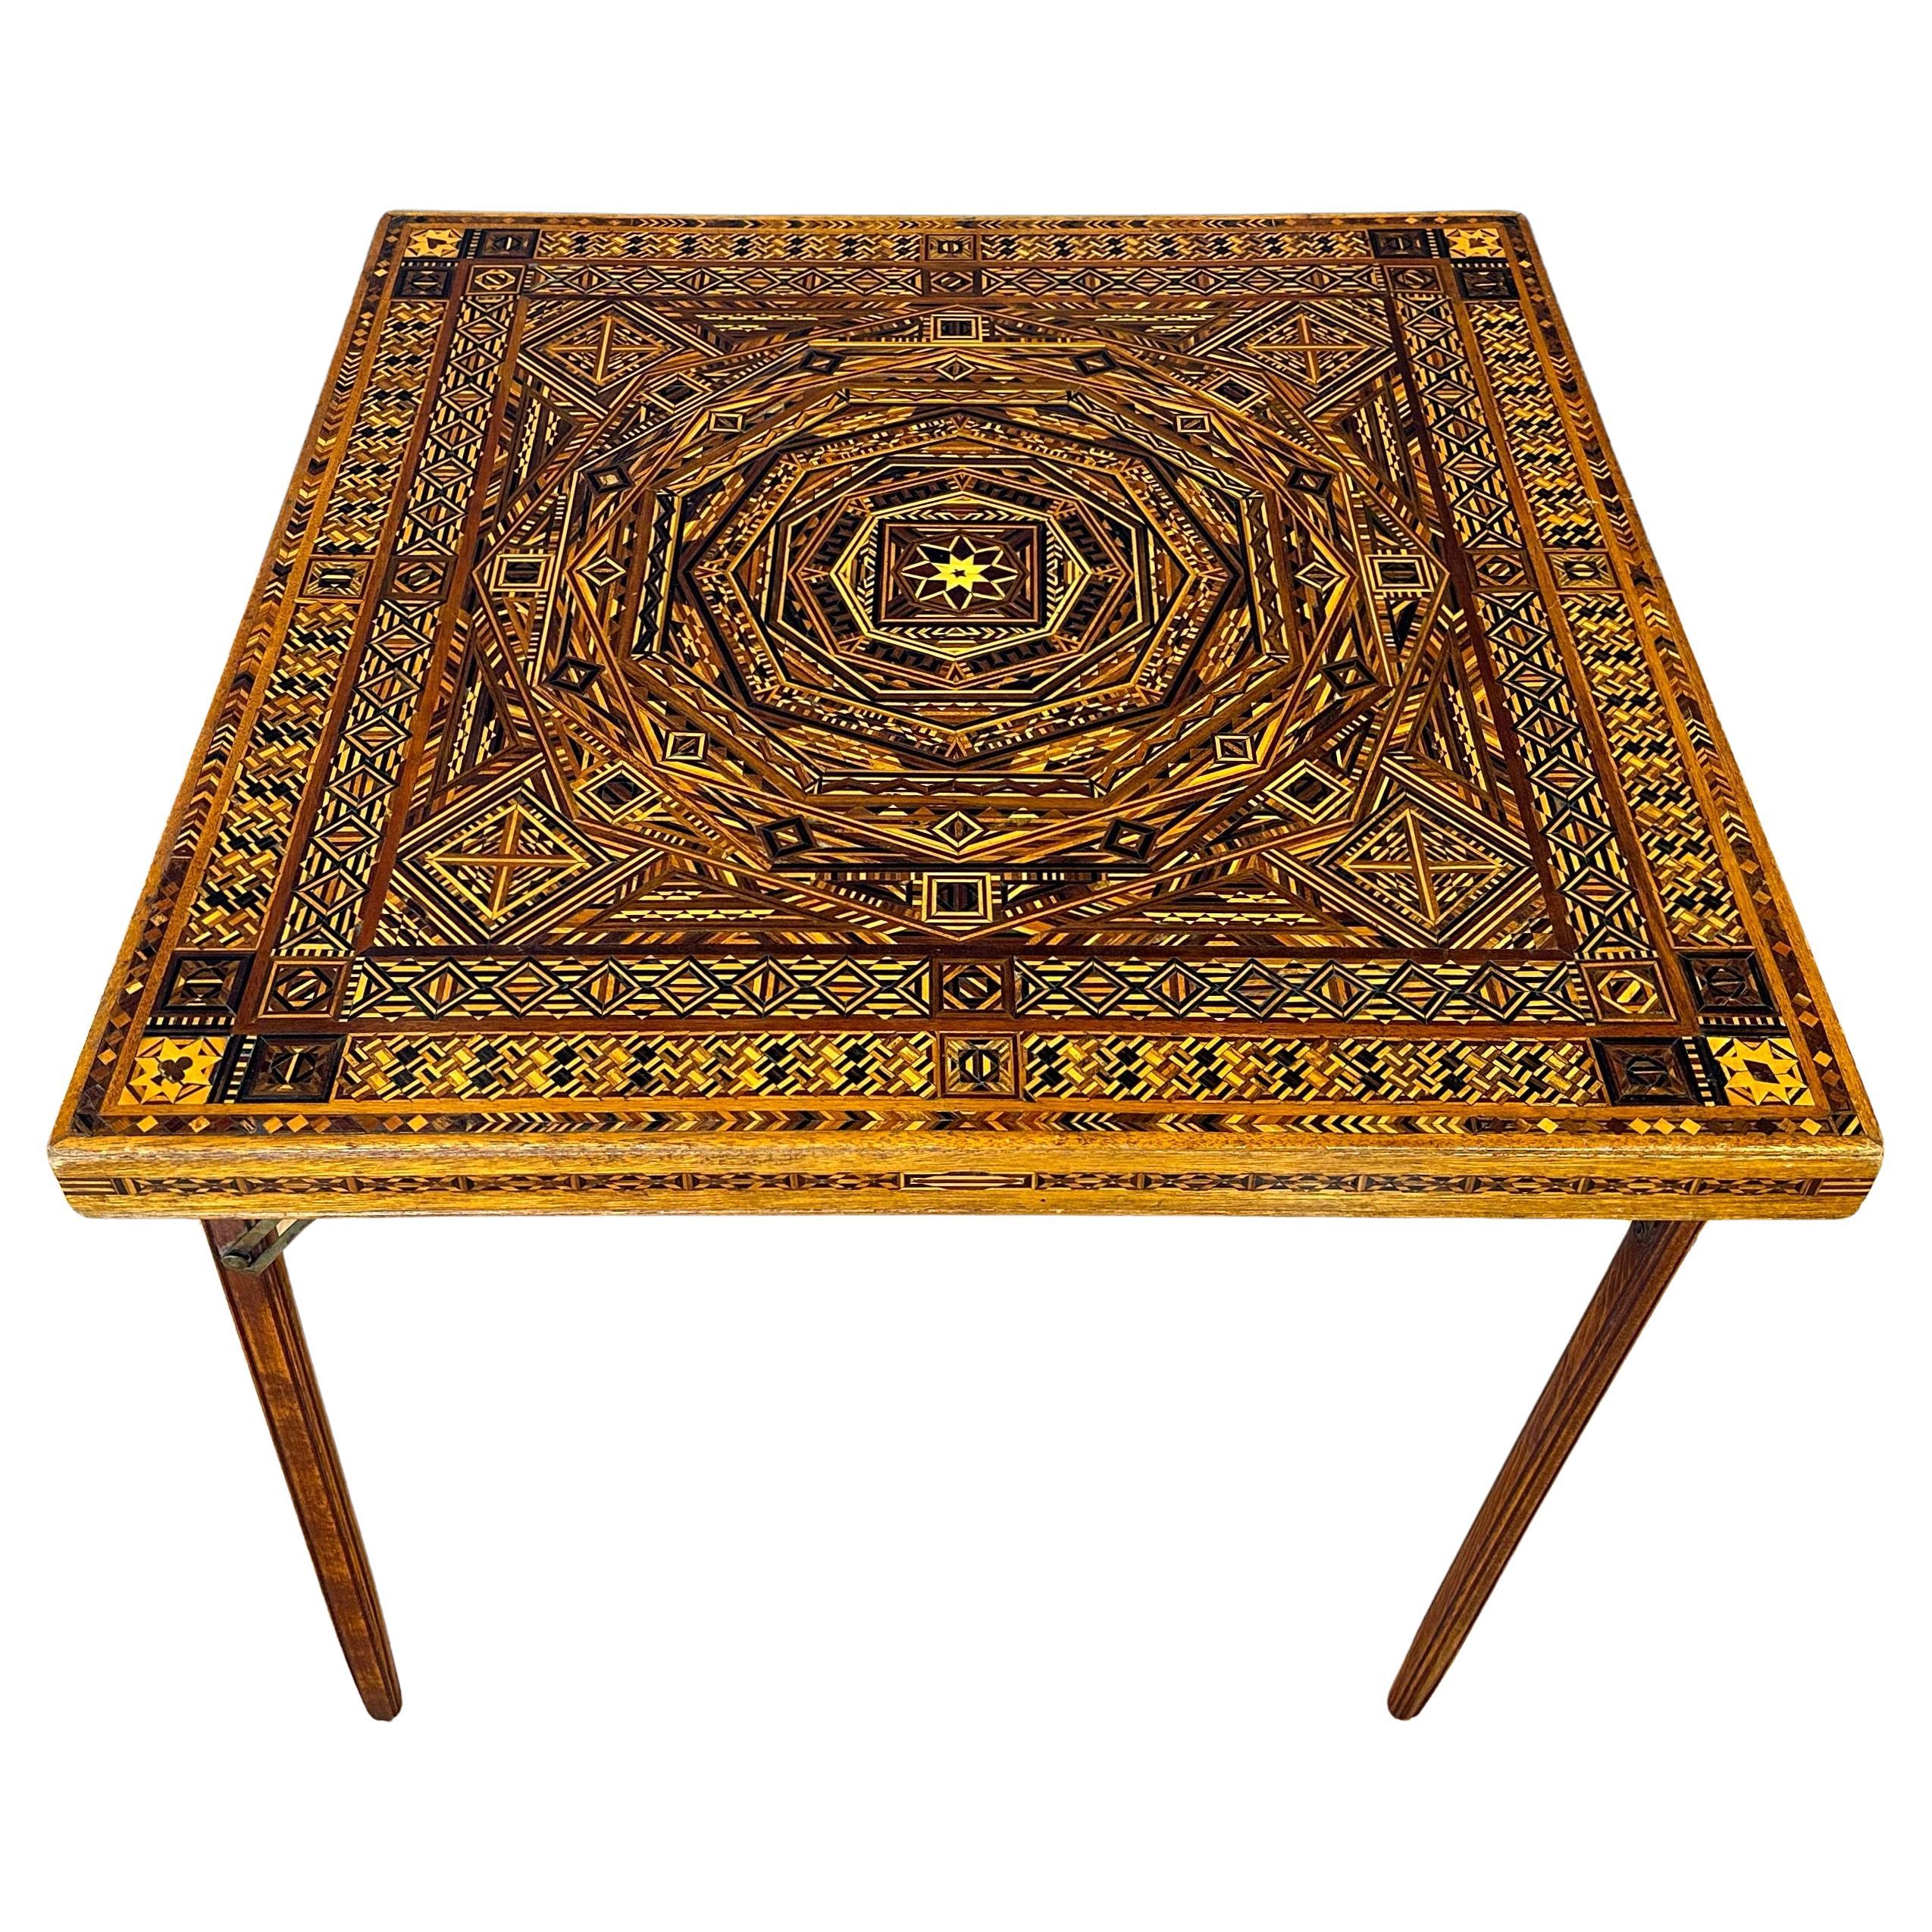 Syrian-Style Exceptionally Intricate Wood Marquetry Folding Card Table, 1930s For Sale